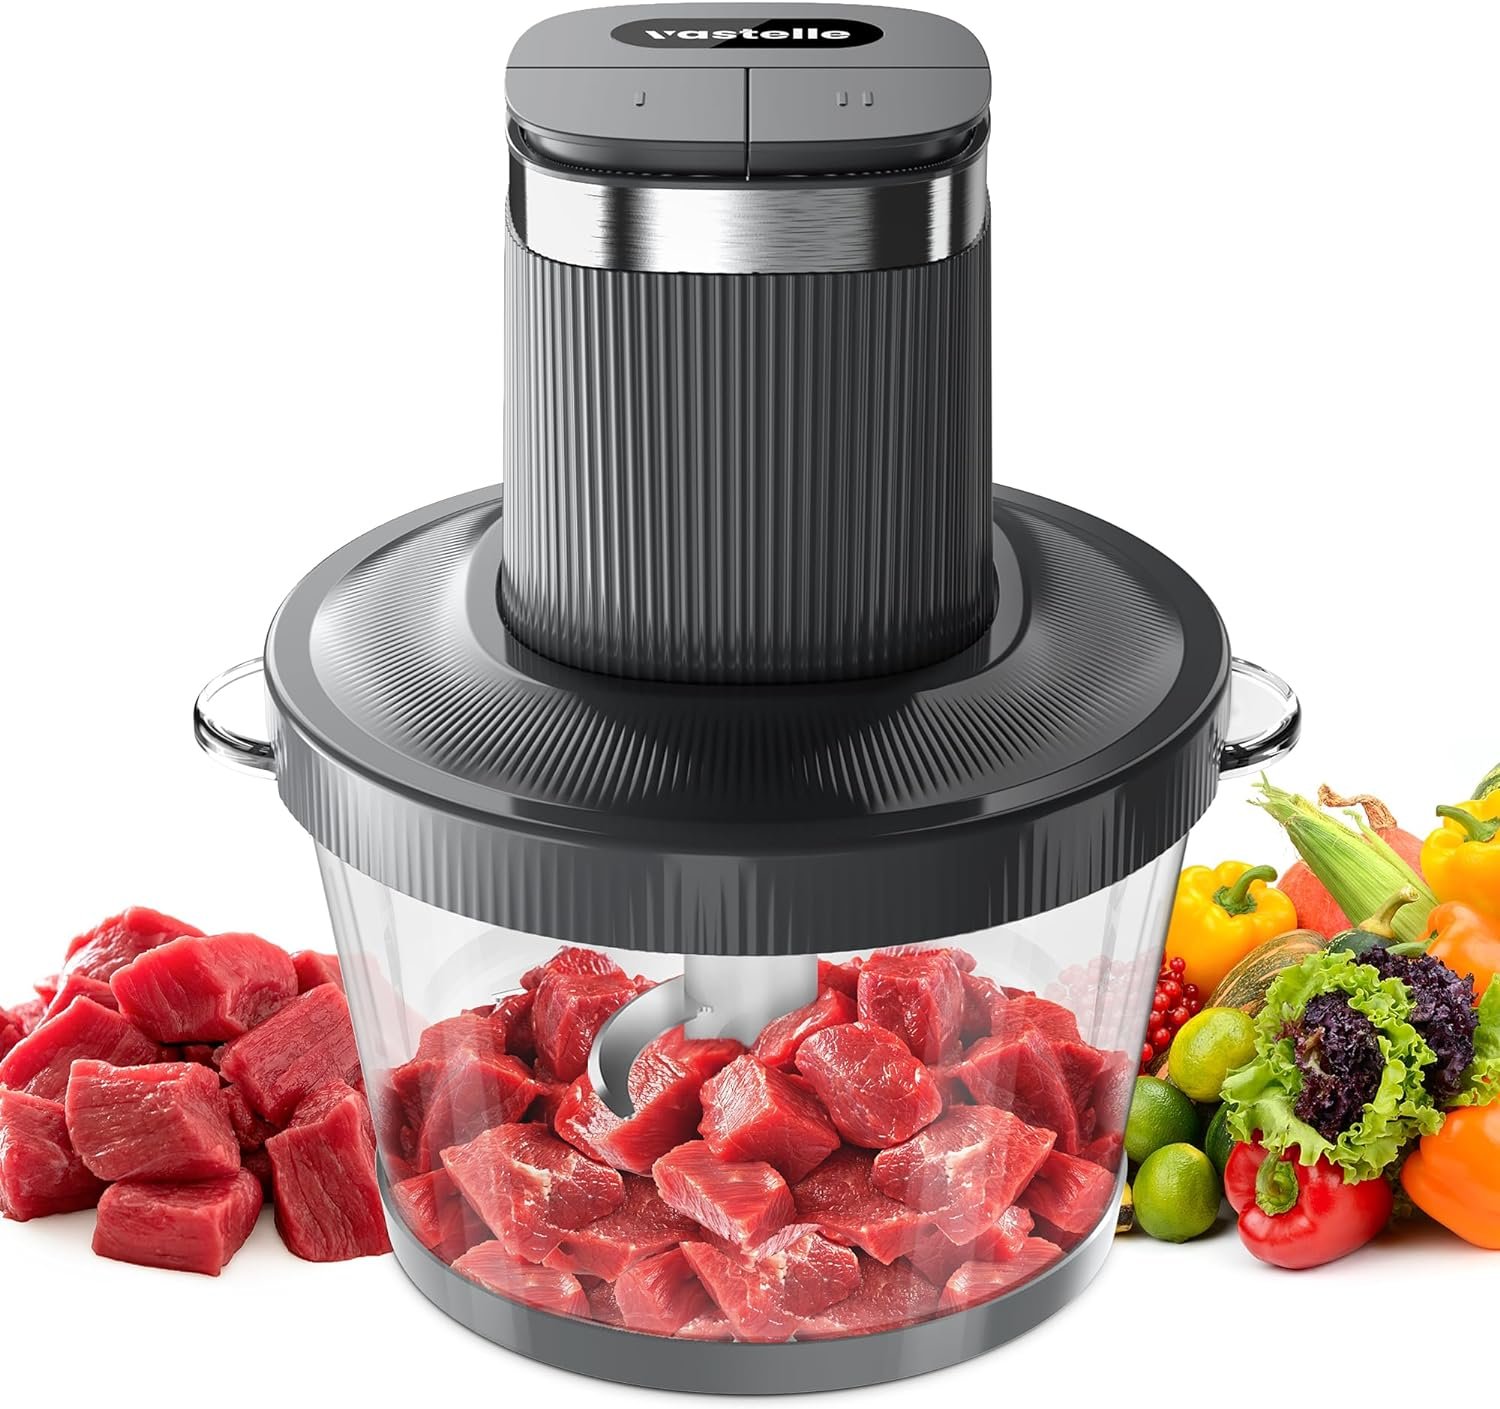 Food Processor, VASTELLE Electric Food Chopper for Meat, Vegetables, Fruits and Nuts, 8 Cup Glass Bowl Food Grinder with 2 Speed, Grey